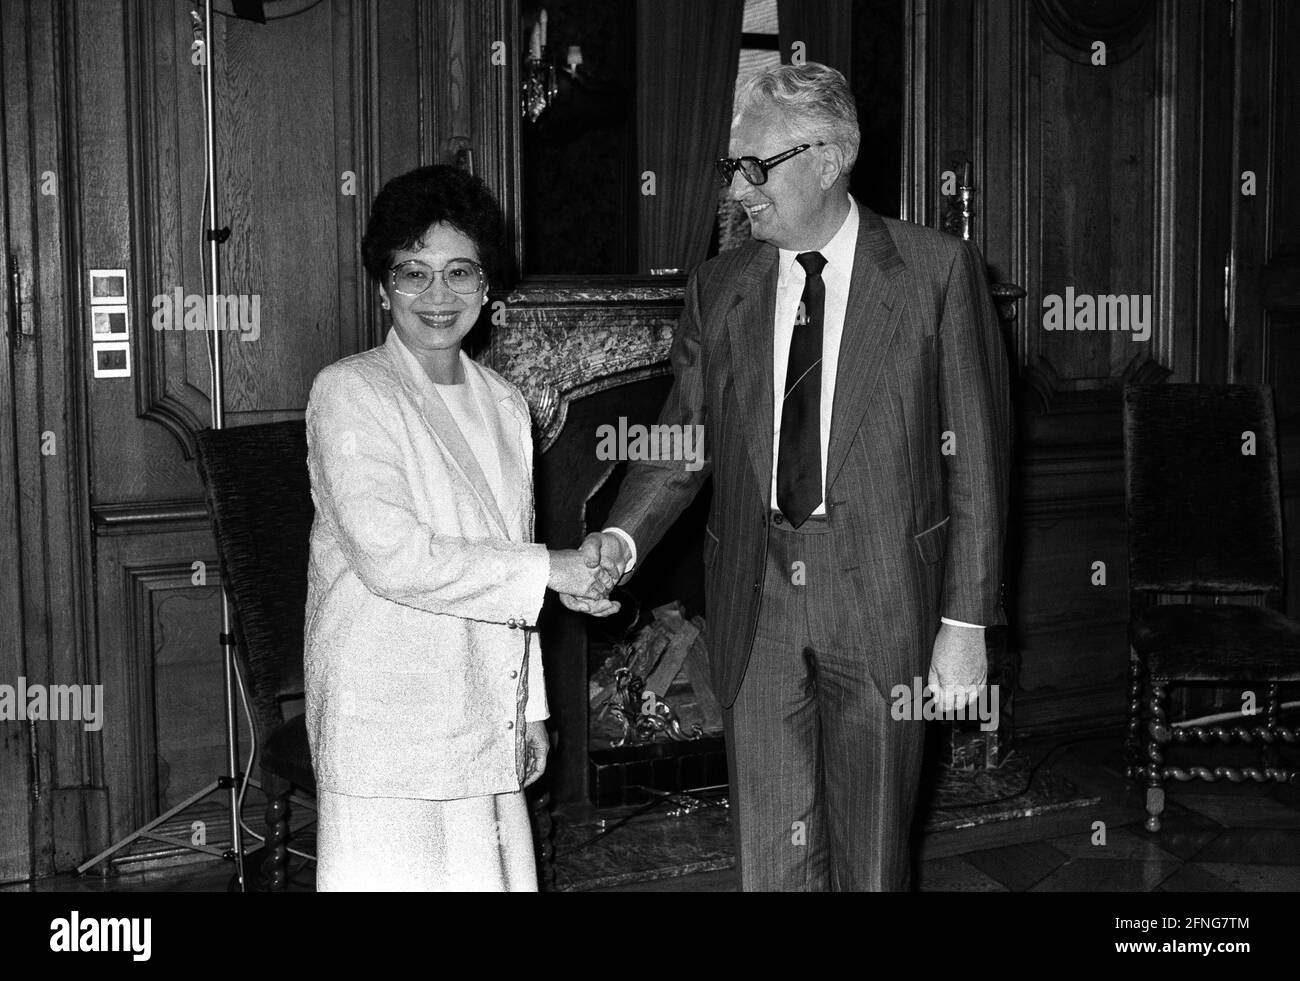 Germany, Bonn, 11.07.1989. Archive No: 07-12-34 State visit of the President of the Philippines Photo: SPD Federal Chairman Hans-Jochen Vogel and President Corazon Aquino [automated translation] Stock Photo